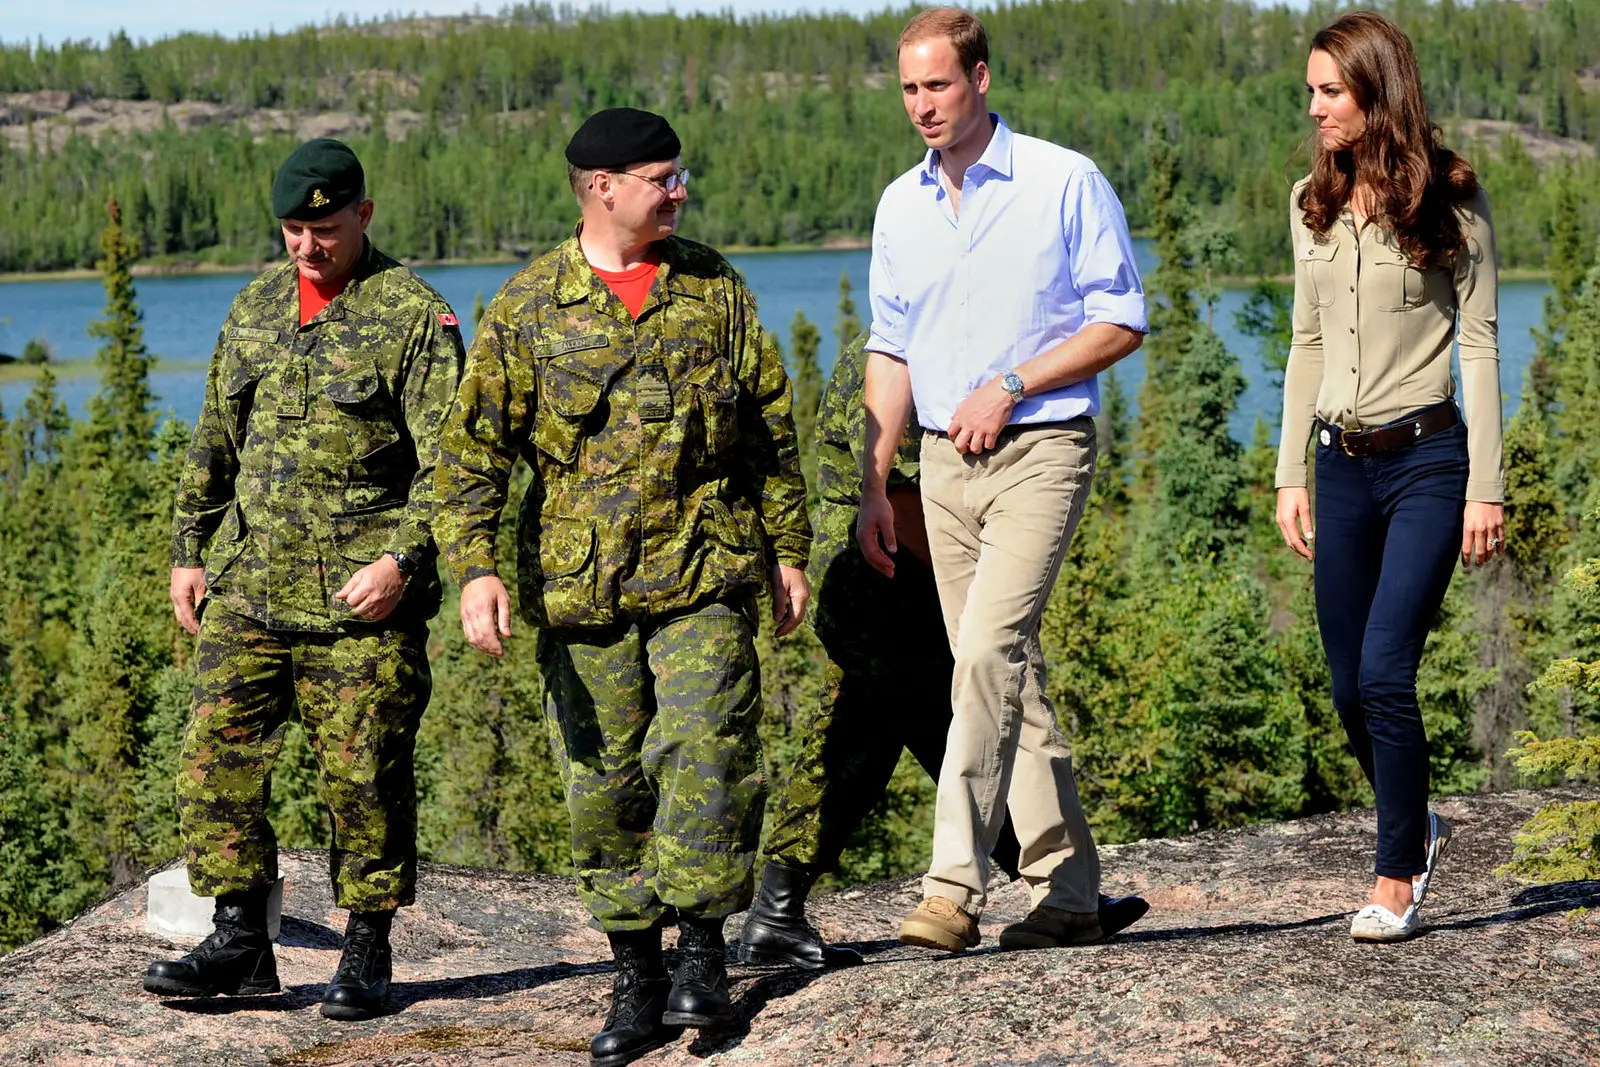 The Duchess of Cambridge in Burberry shirt duirng canada tour in 2011